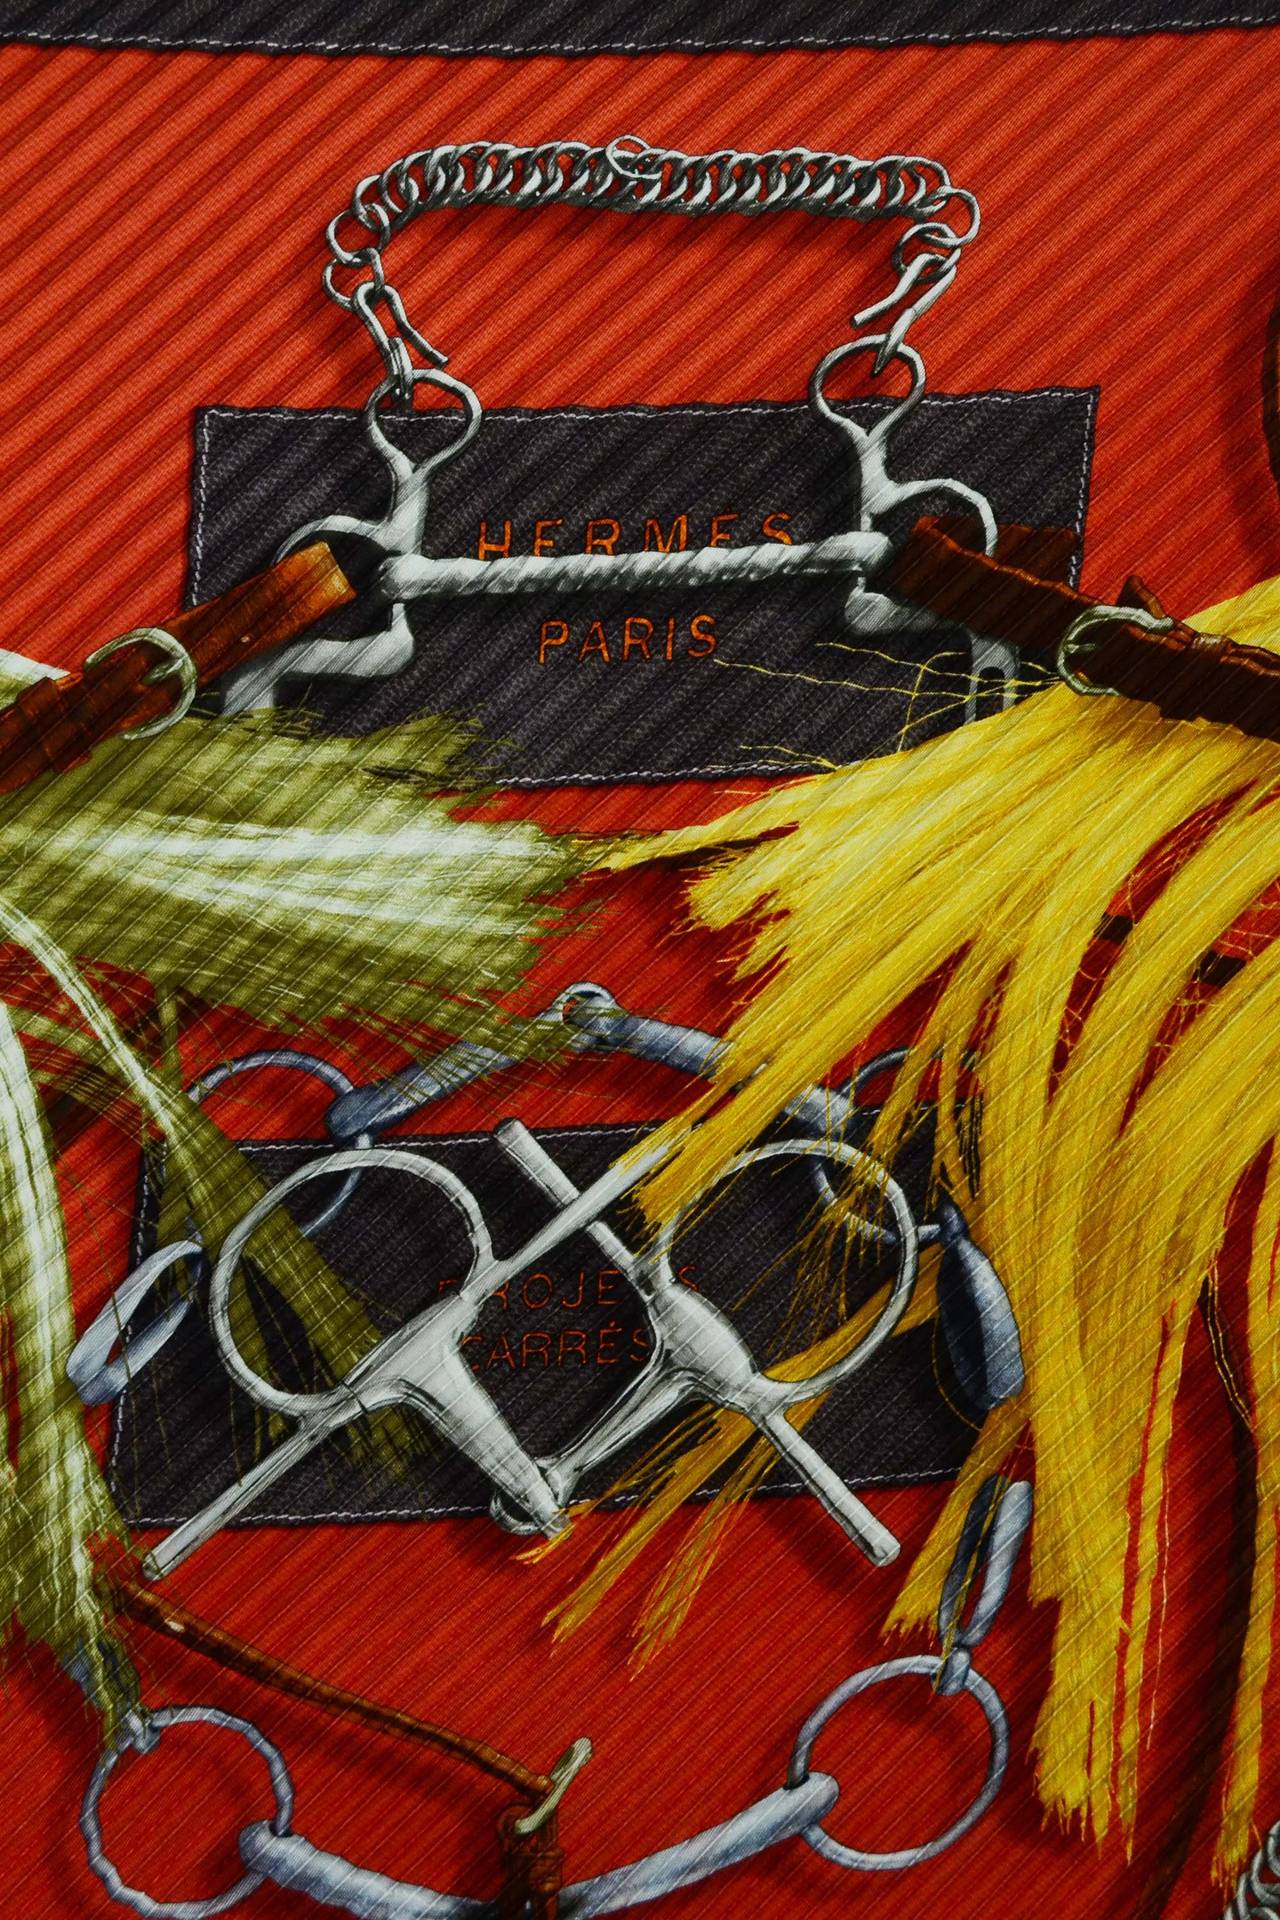 Hermes Burnt Orange Equestrian Themed Silk Pleaty Scarf
    Made in: France
    Color: Burnt orange, brown, yellow, tan
    Composition: Silk
    Overall Condition: Excellent with no visible signs of wear
Measurements:
Length: 53.5